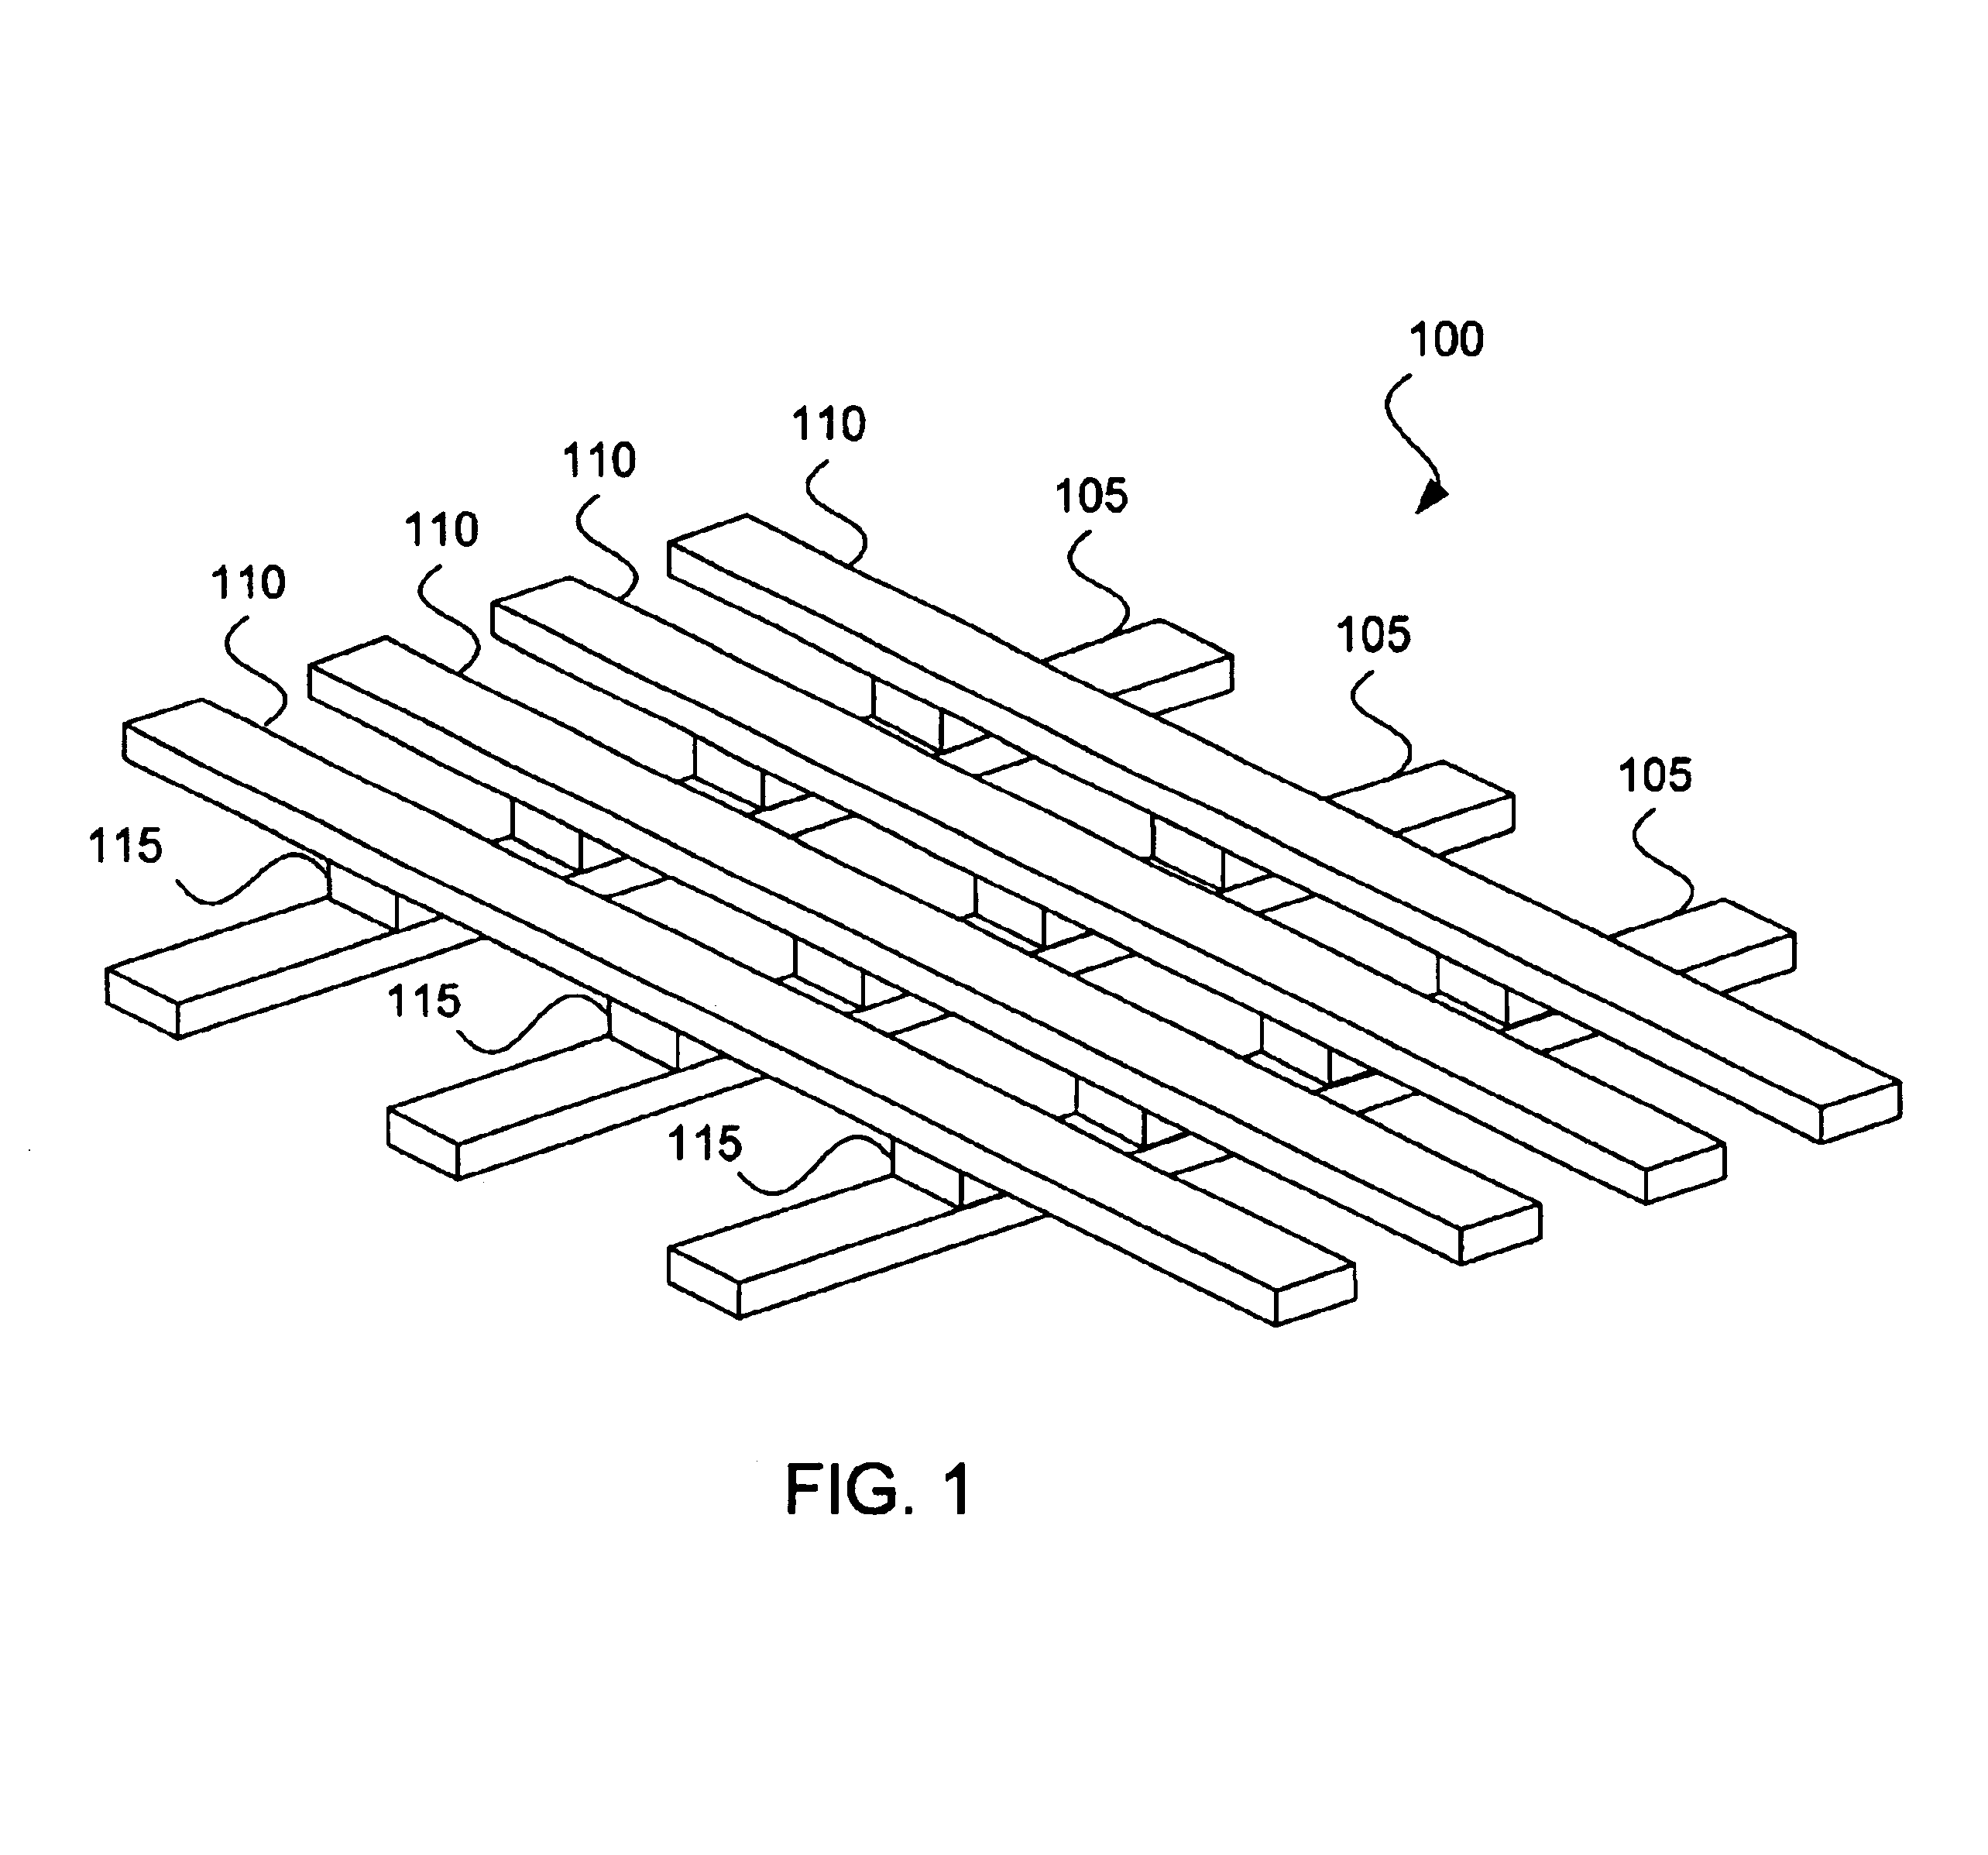 Conductive memory device with conductive oxide electrodes